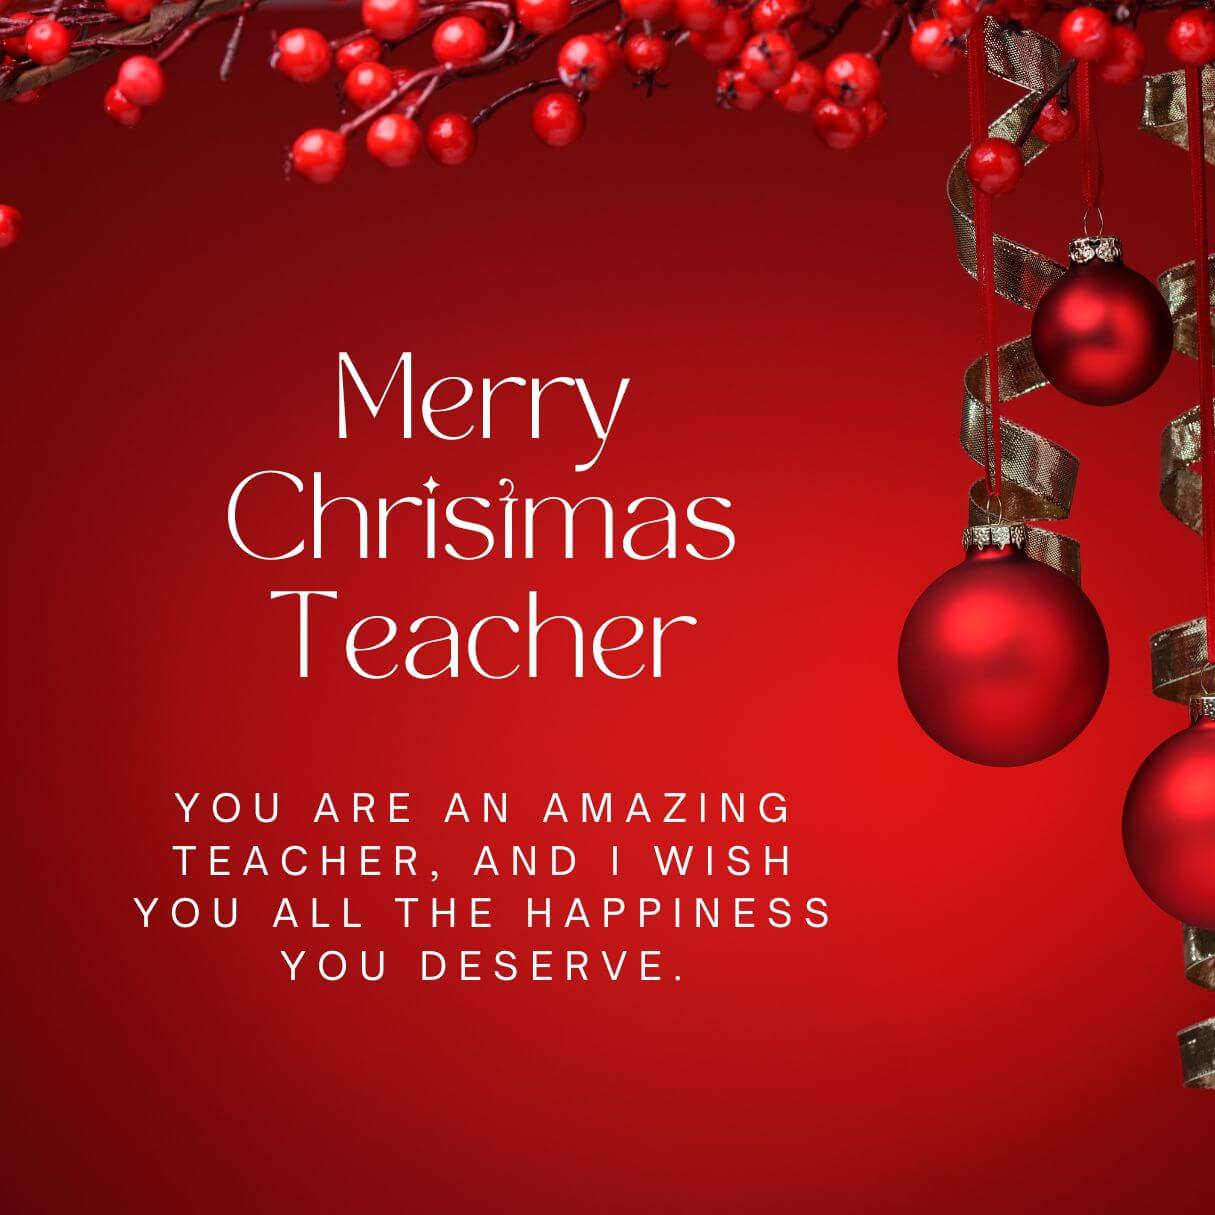 Merry Christmas Wishes For Amazing Teachers